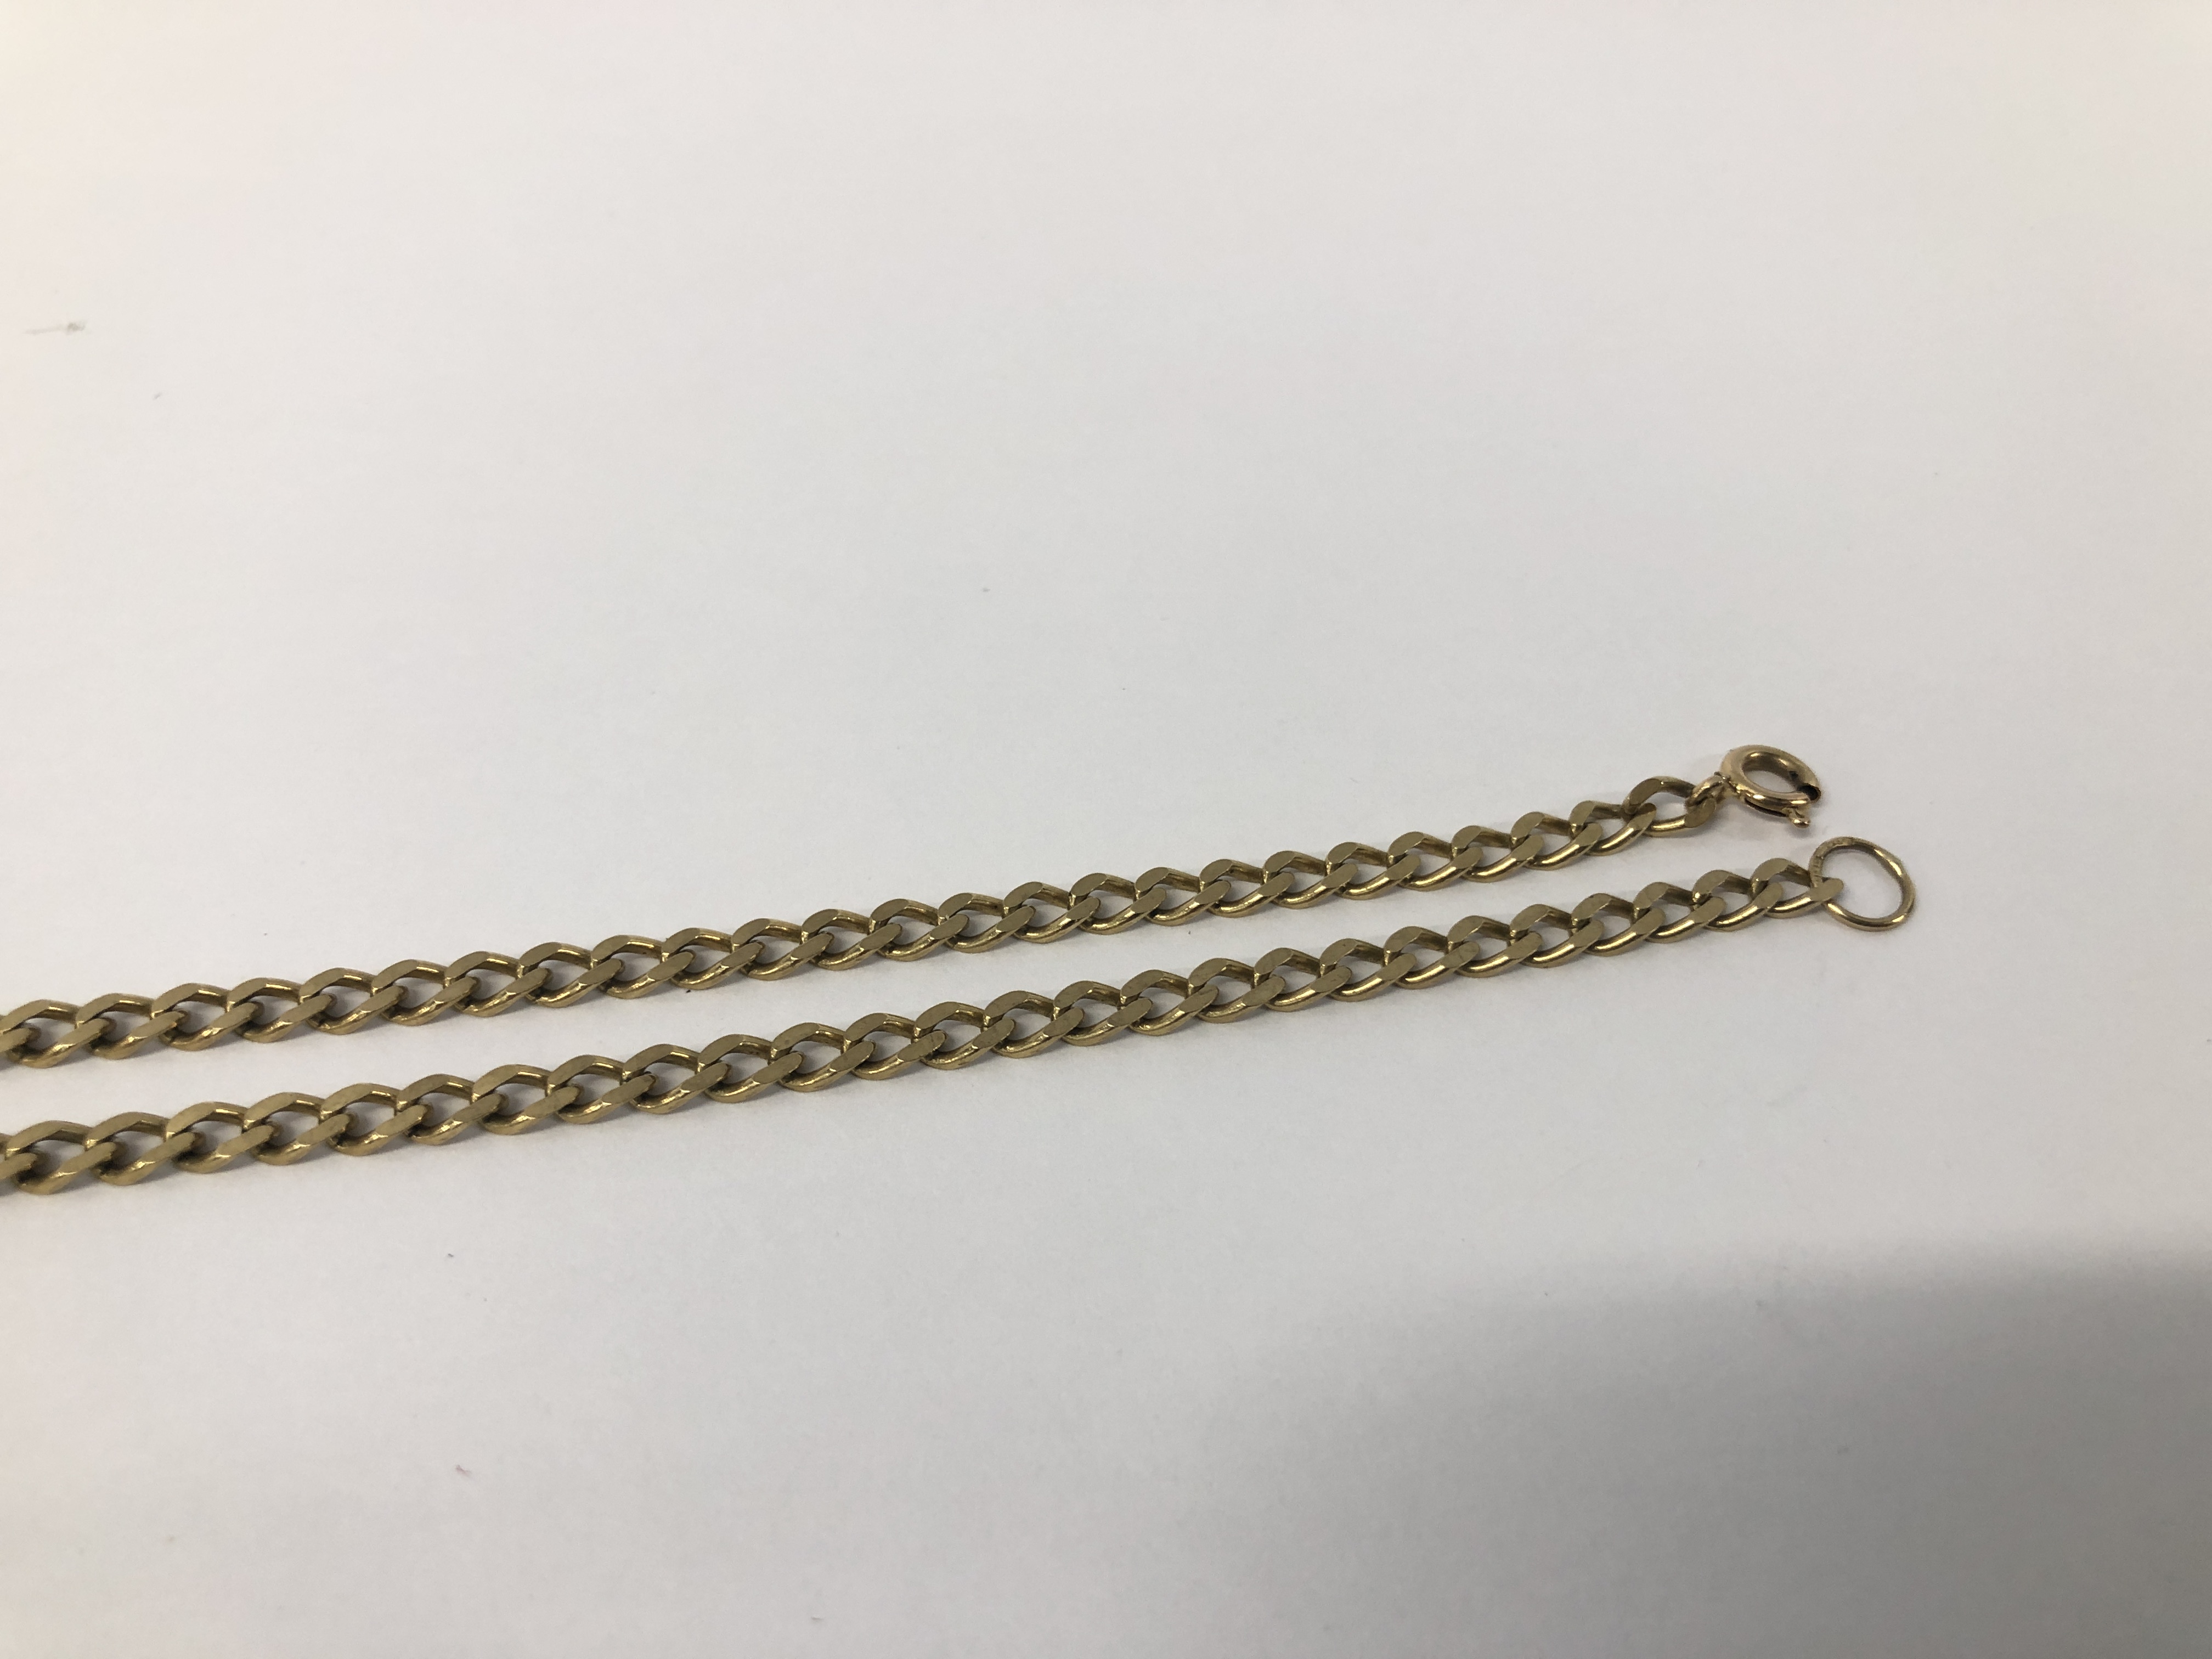 A 9CT GOLD CHAIN NECKLACE WITH FLAT OVAL LINKS, L 51CM. - Image 4 of 5